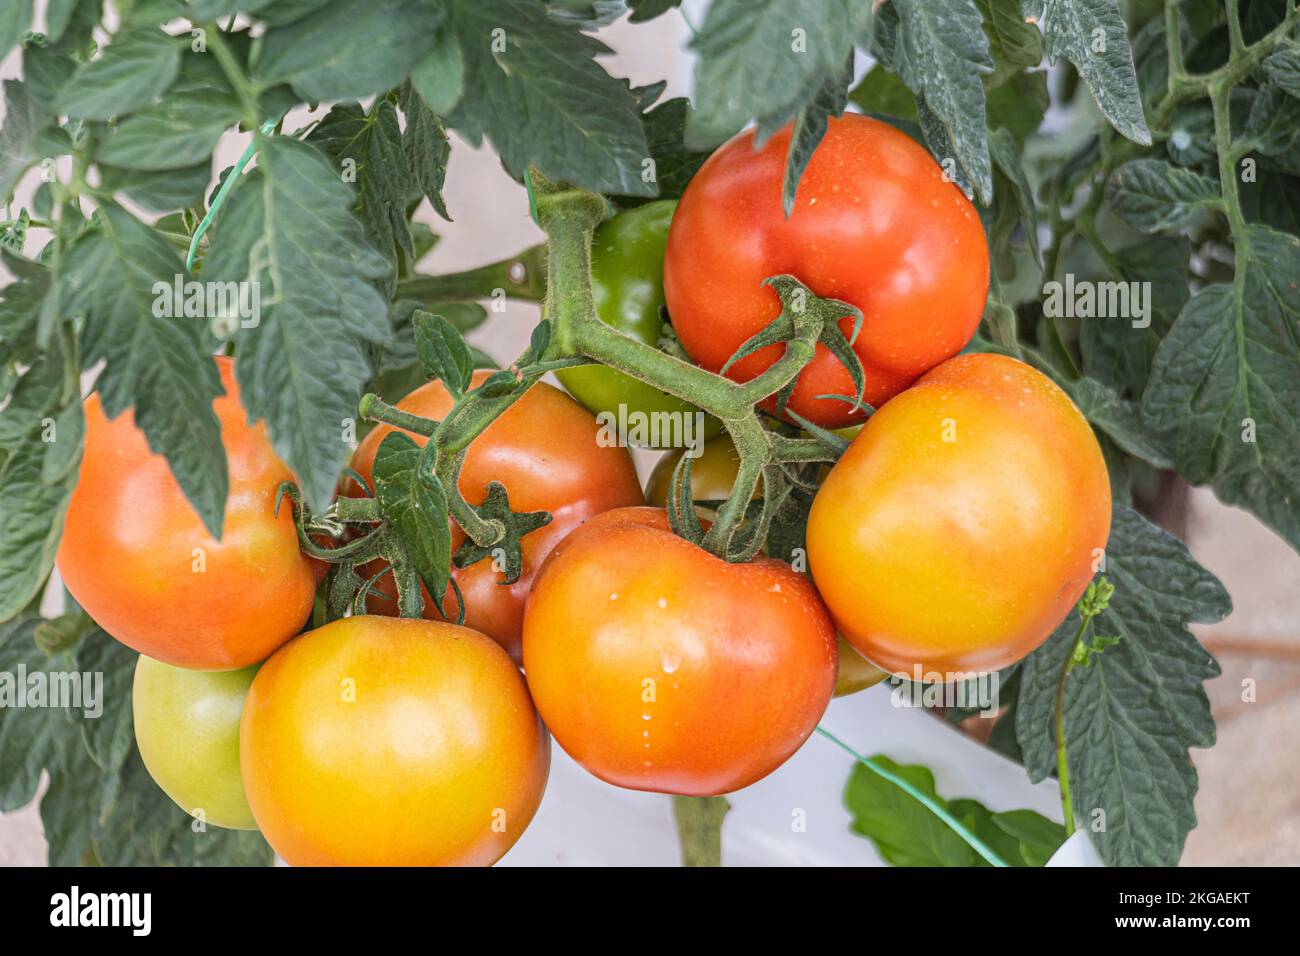 Cluster of tomatoes on the vine at the farm in colder highland region of Cameron Highlands, Malaysia. Stock Photo